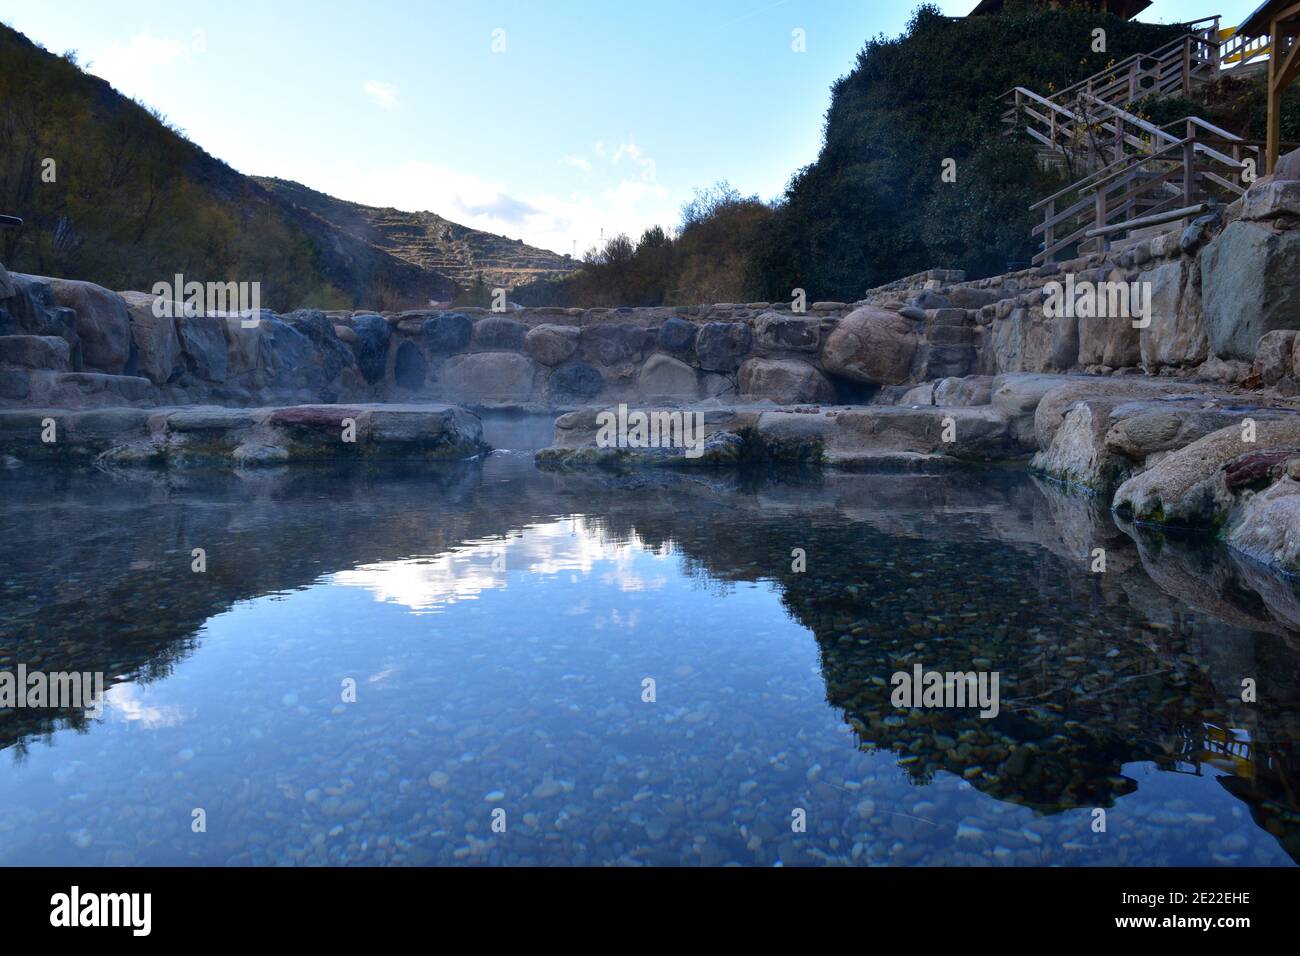 View of the Arnedillo thermal water pools from the height of the water. Hot springs in stone in the village of Arnedillo. Stock Photo